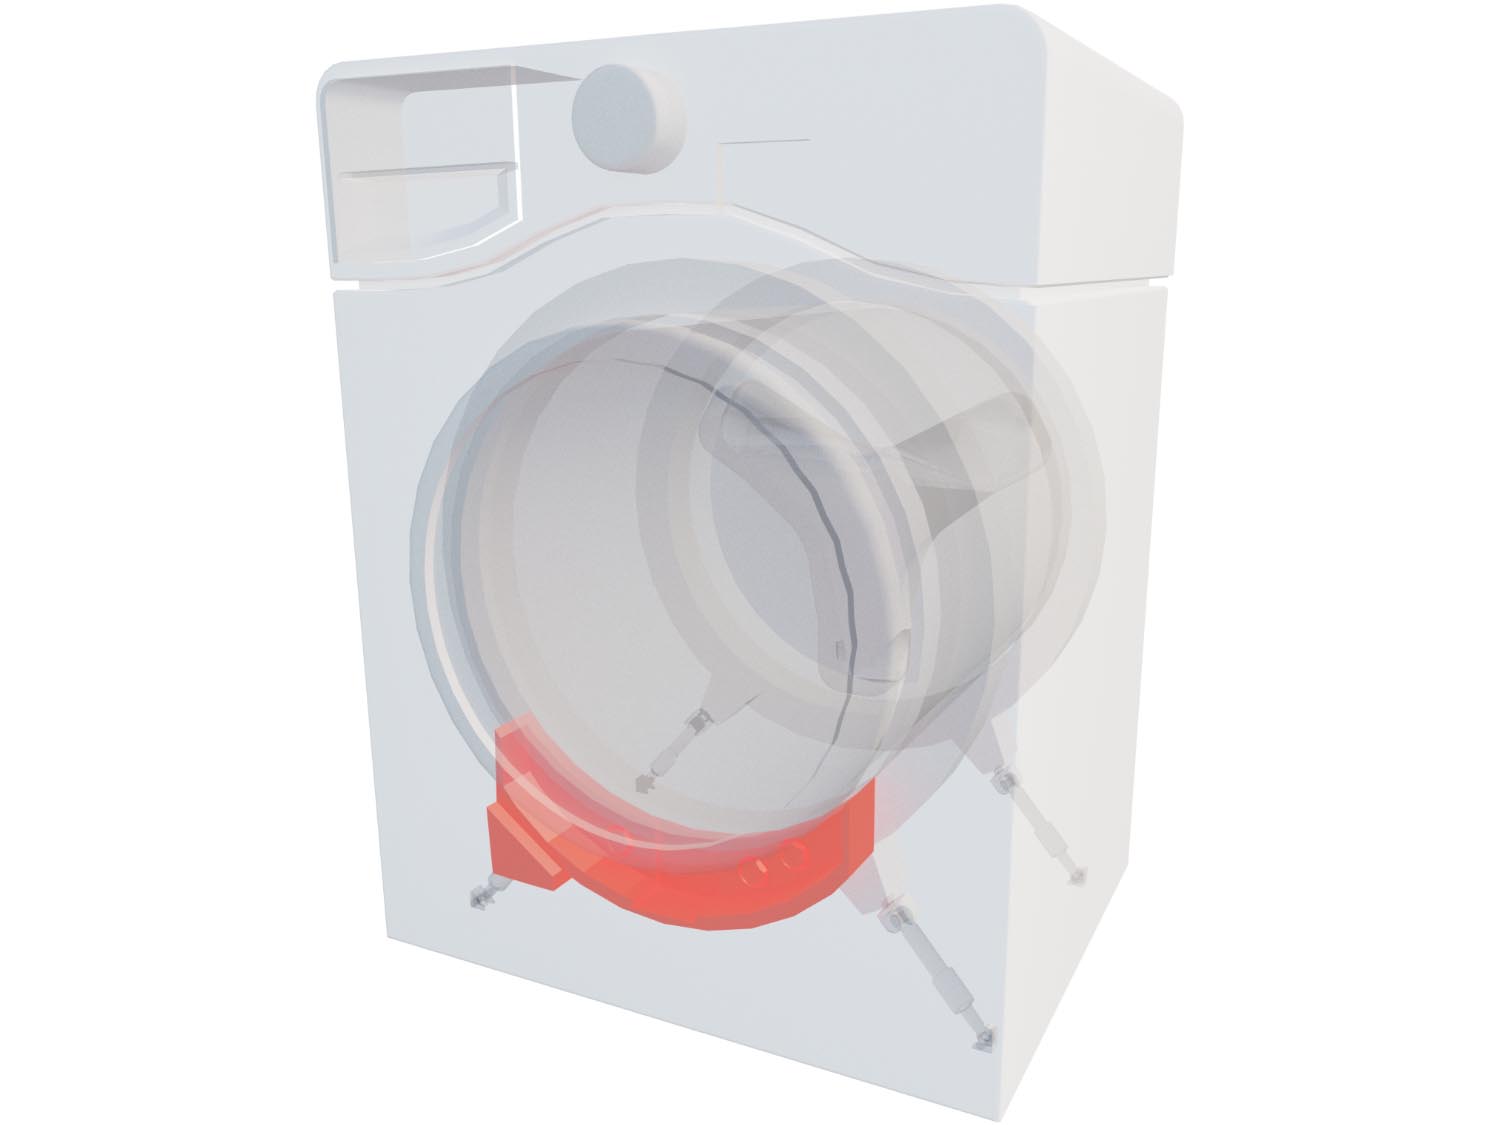 A 3D diagram showing the components of a front load washer and specifying the location of the counterweight